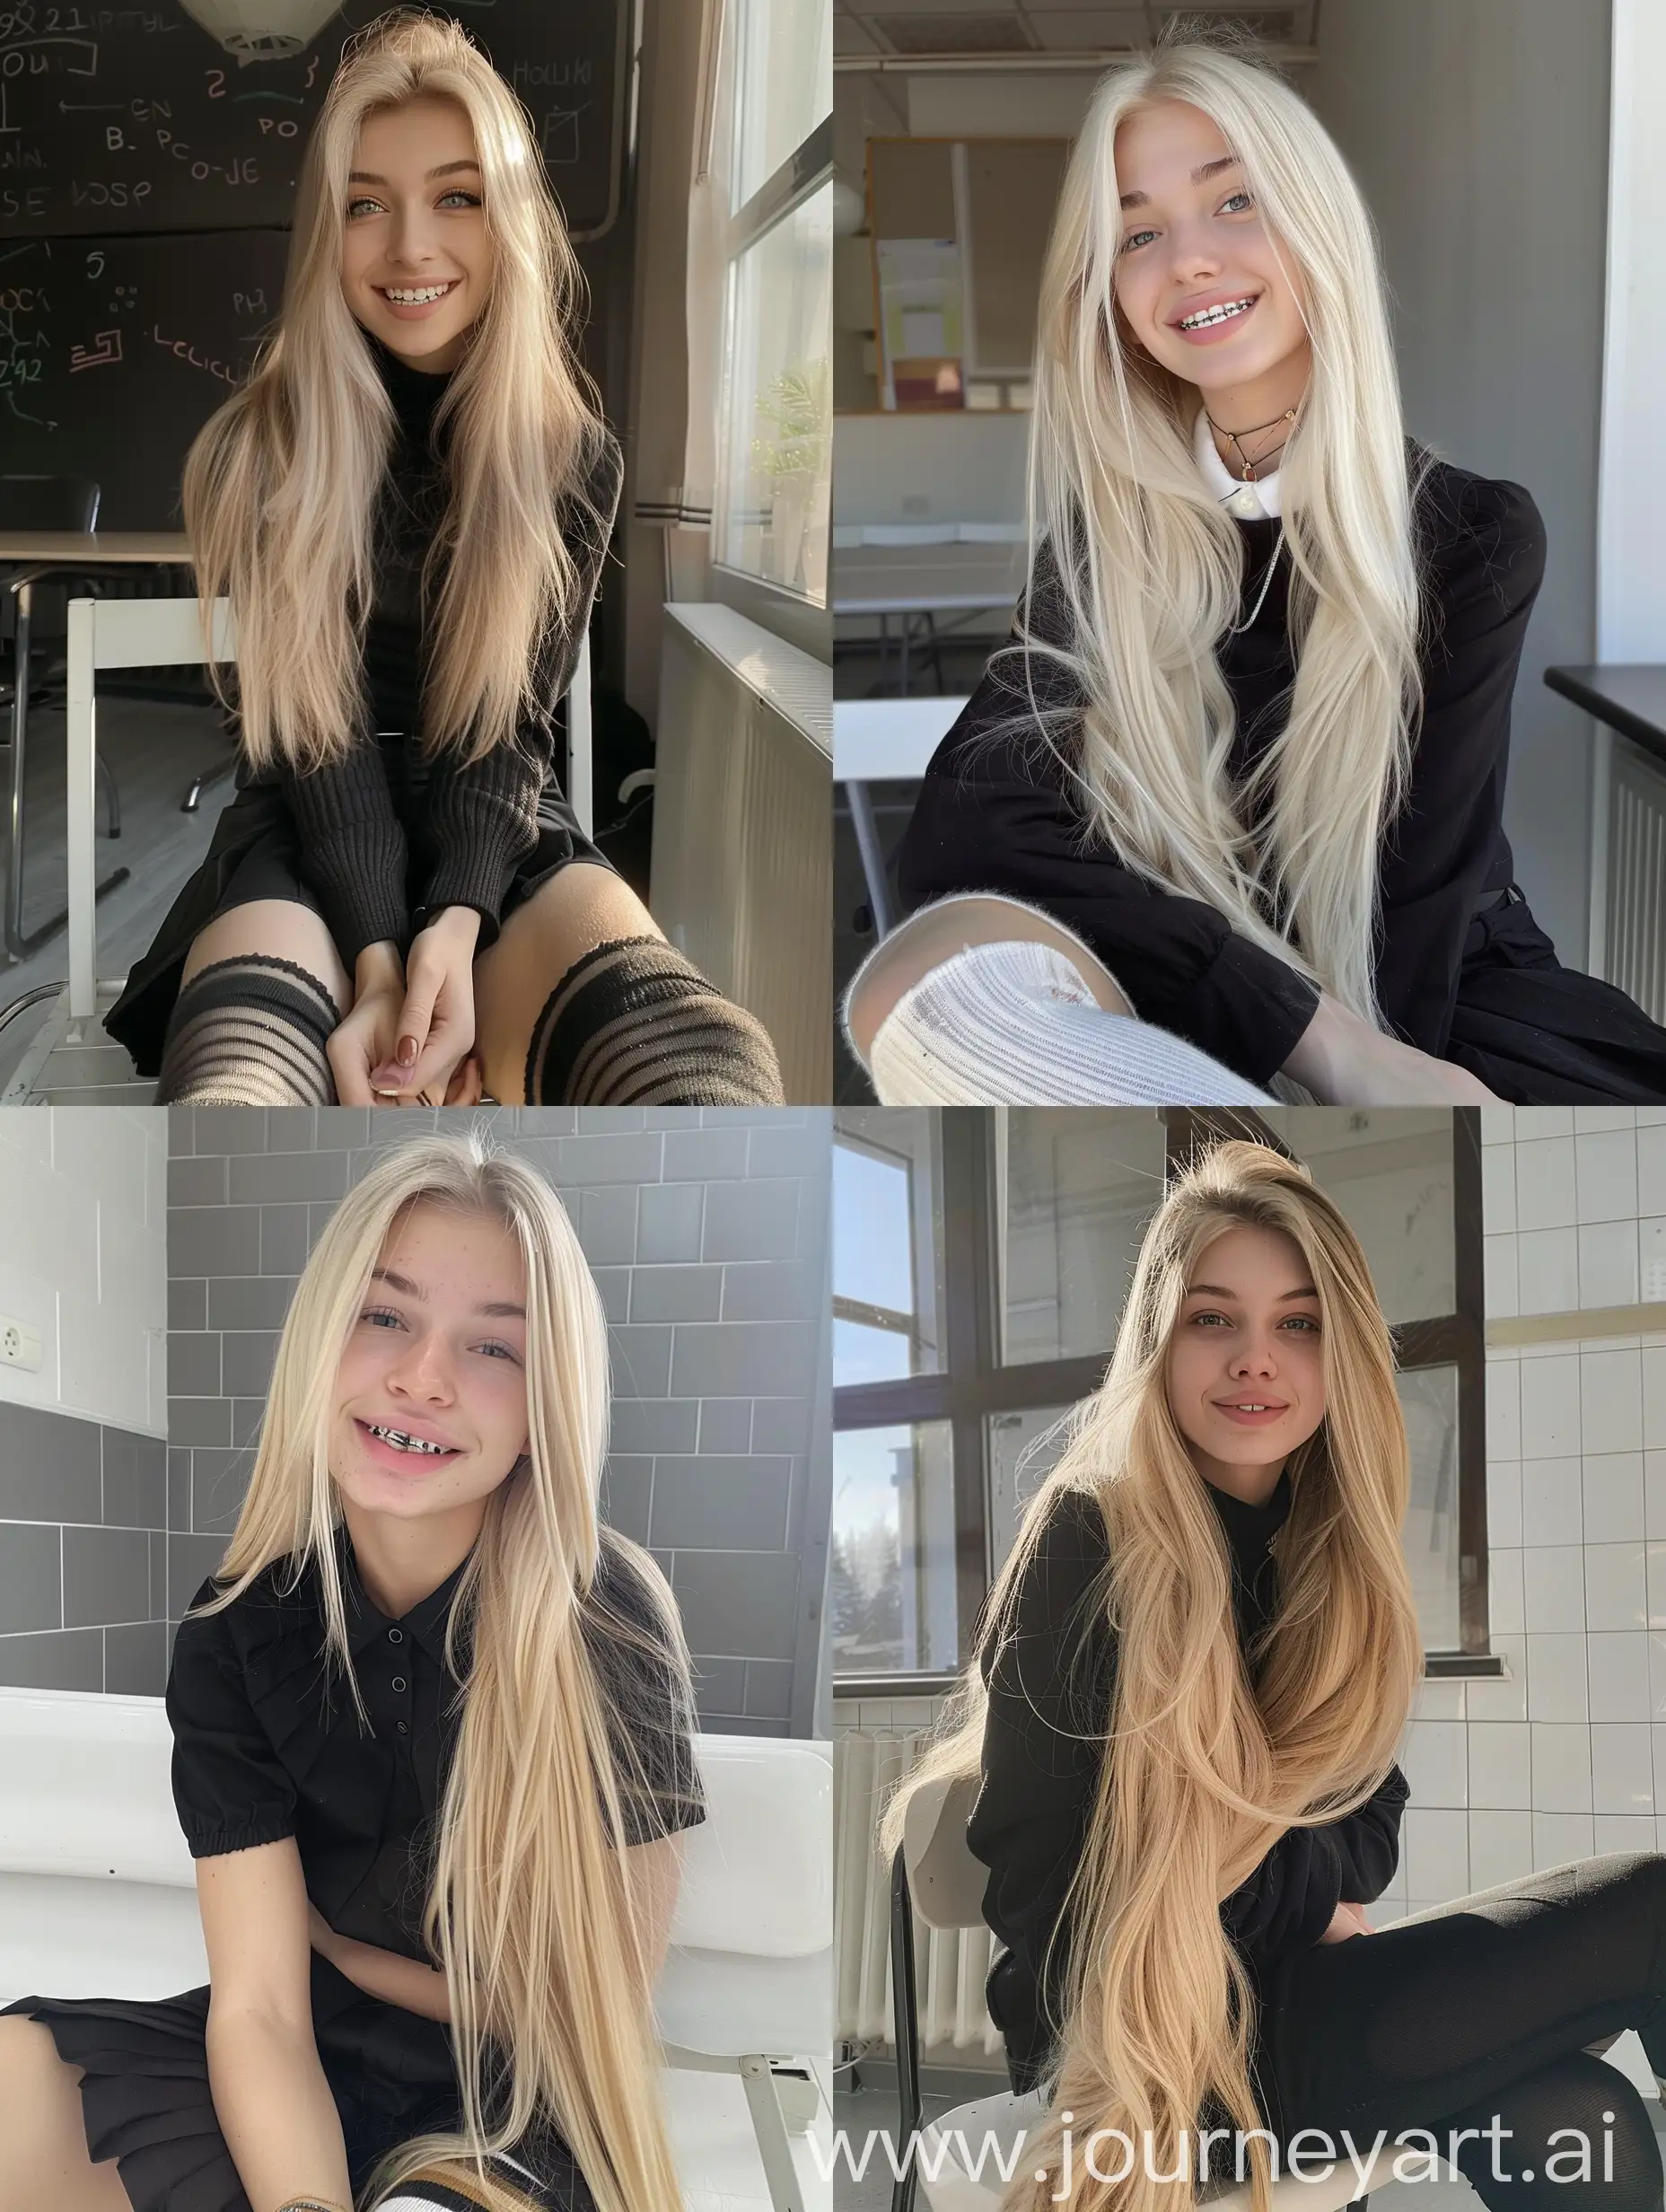 1 Ukrainian girl, long blond hair , 22 years old, influencer, beauty , in the school ,school black uniform , makeup, smiling, dental braces, chão view, sitting on chair , socks and boots, no effect, selfie , iphone selfie, no filters , iphone photo natural